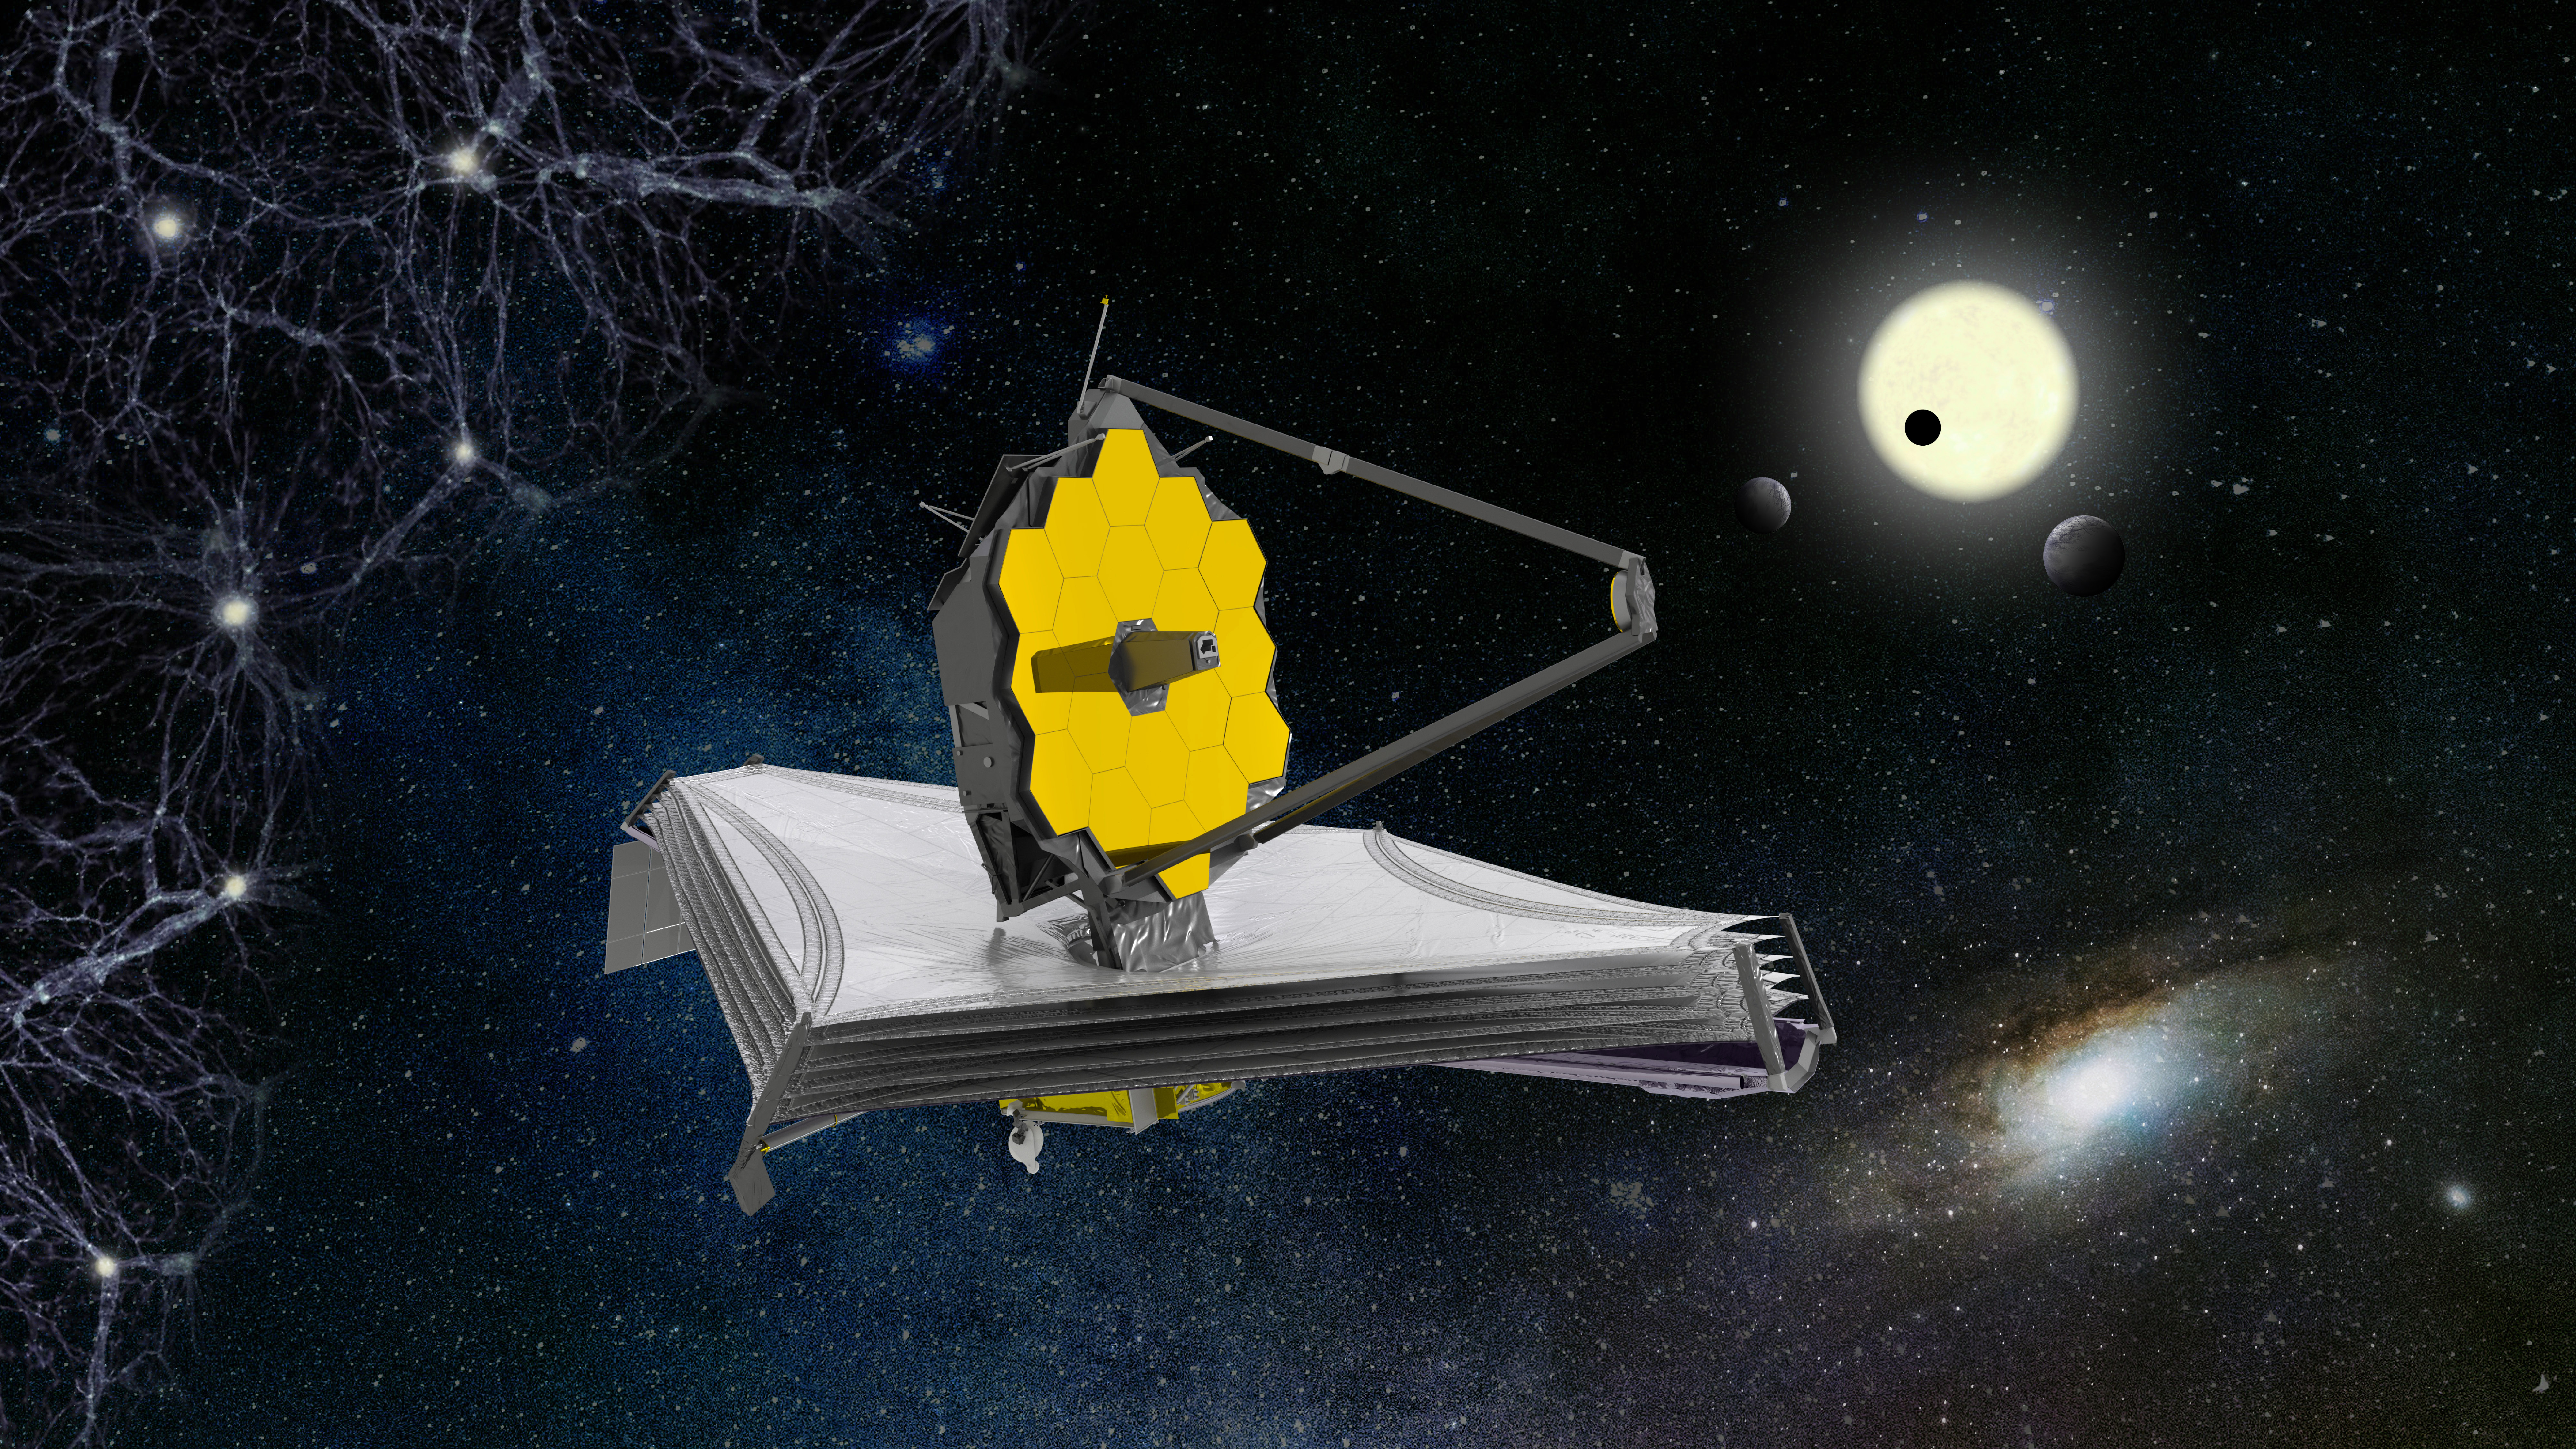 The James Webb Space Telescope will be able to see the first stars and galaxies that emerged in the universe after the Big Bang.